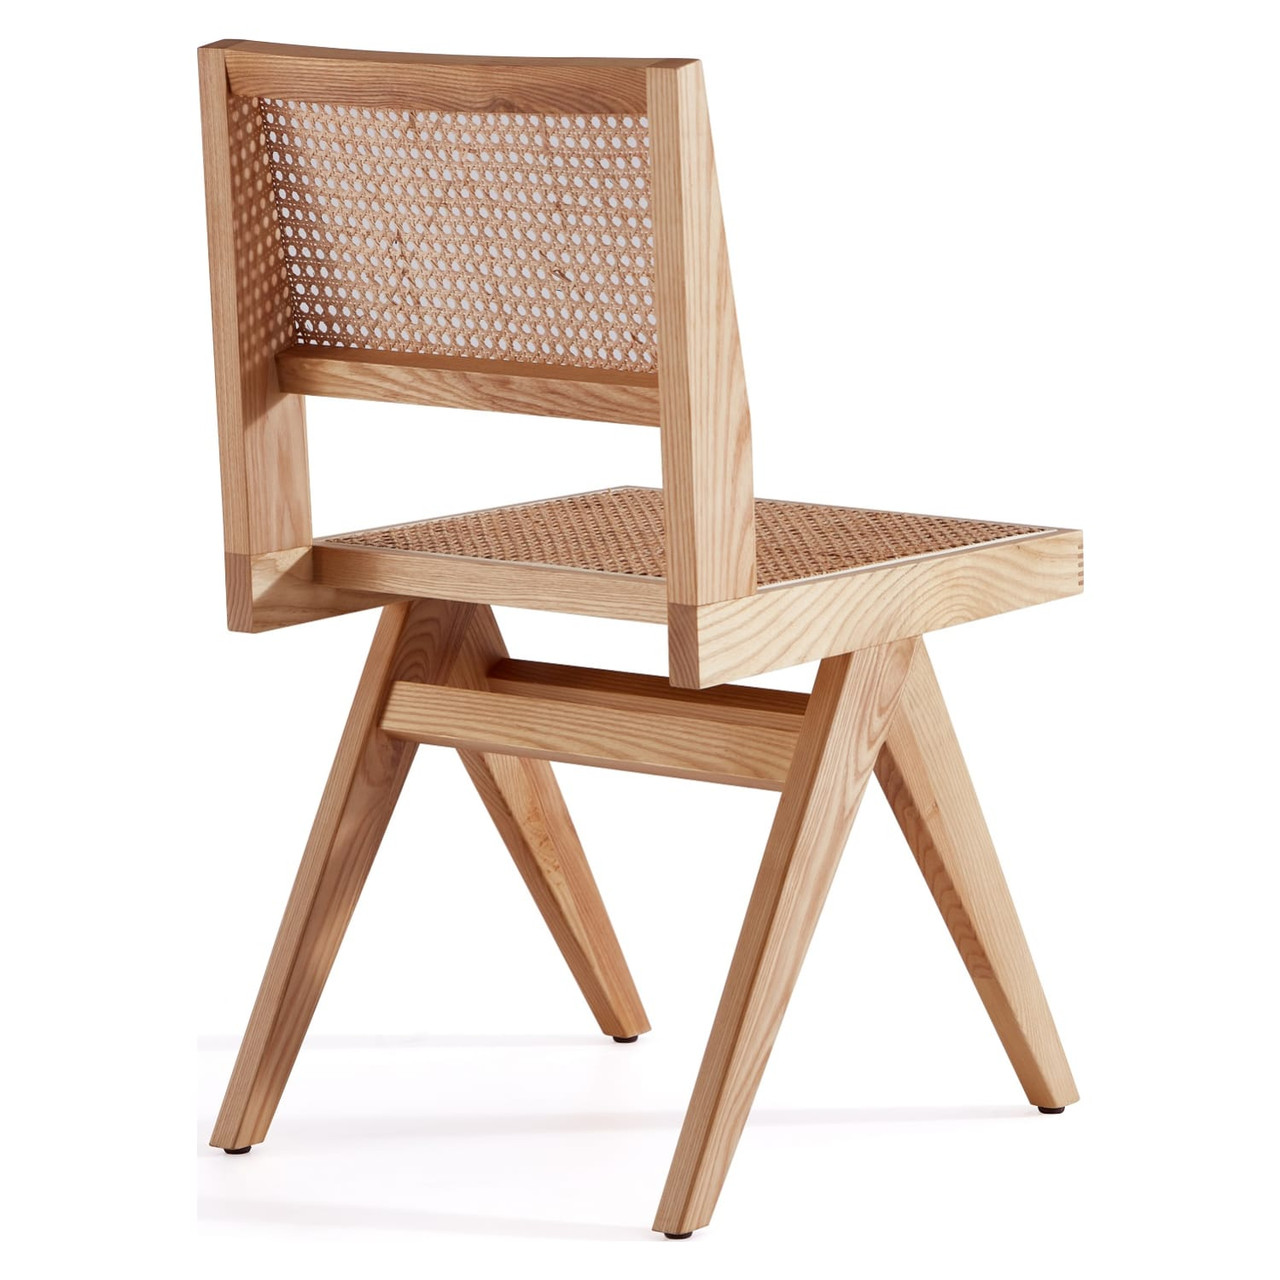 Hamlet Dining Chair in Nature Cane - Set of 4